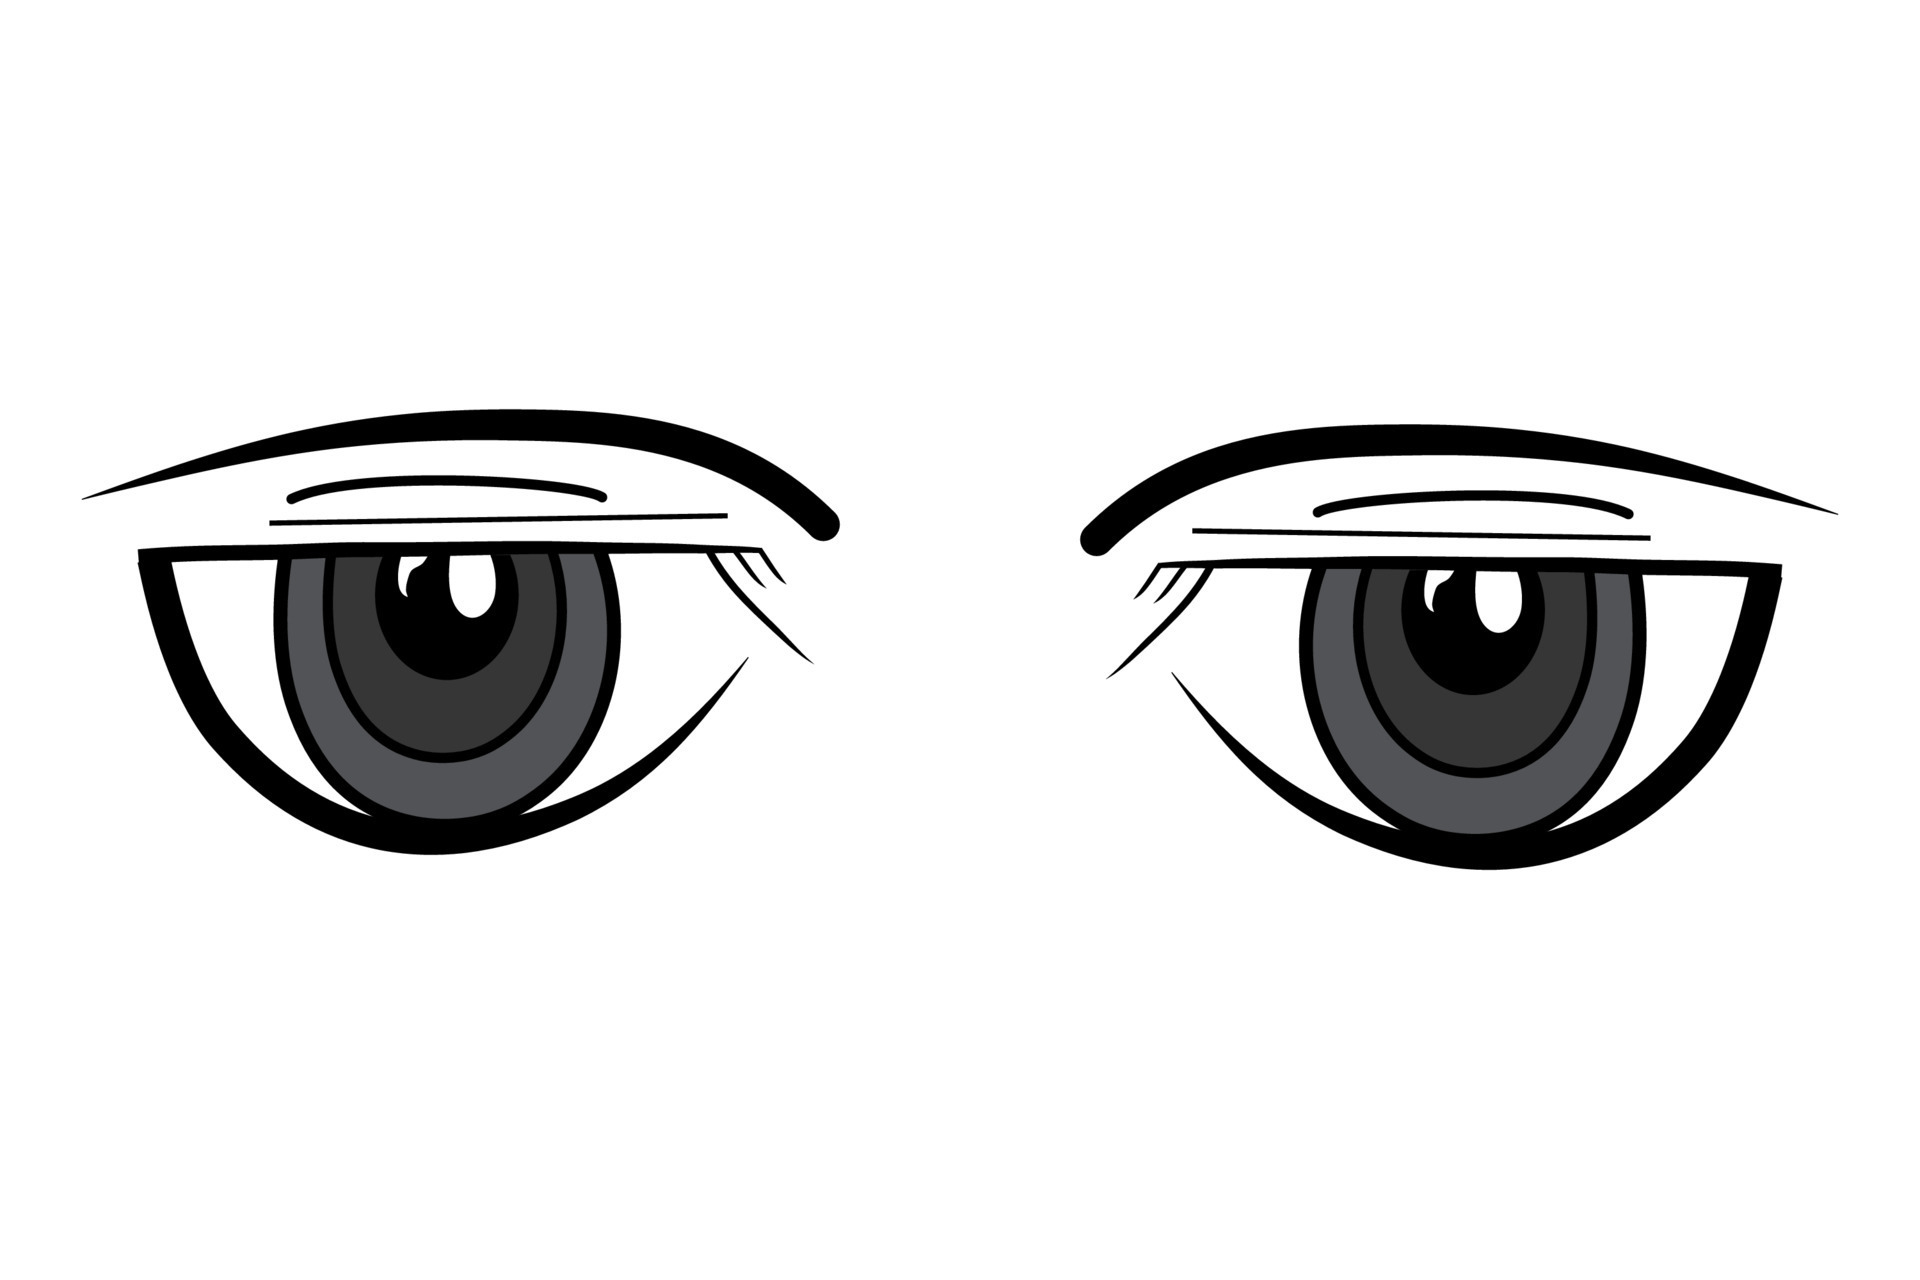 How to Draw Anime Eyes  Male printable step by step drawing sheet   DrawingTutorials101com